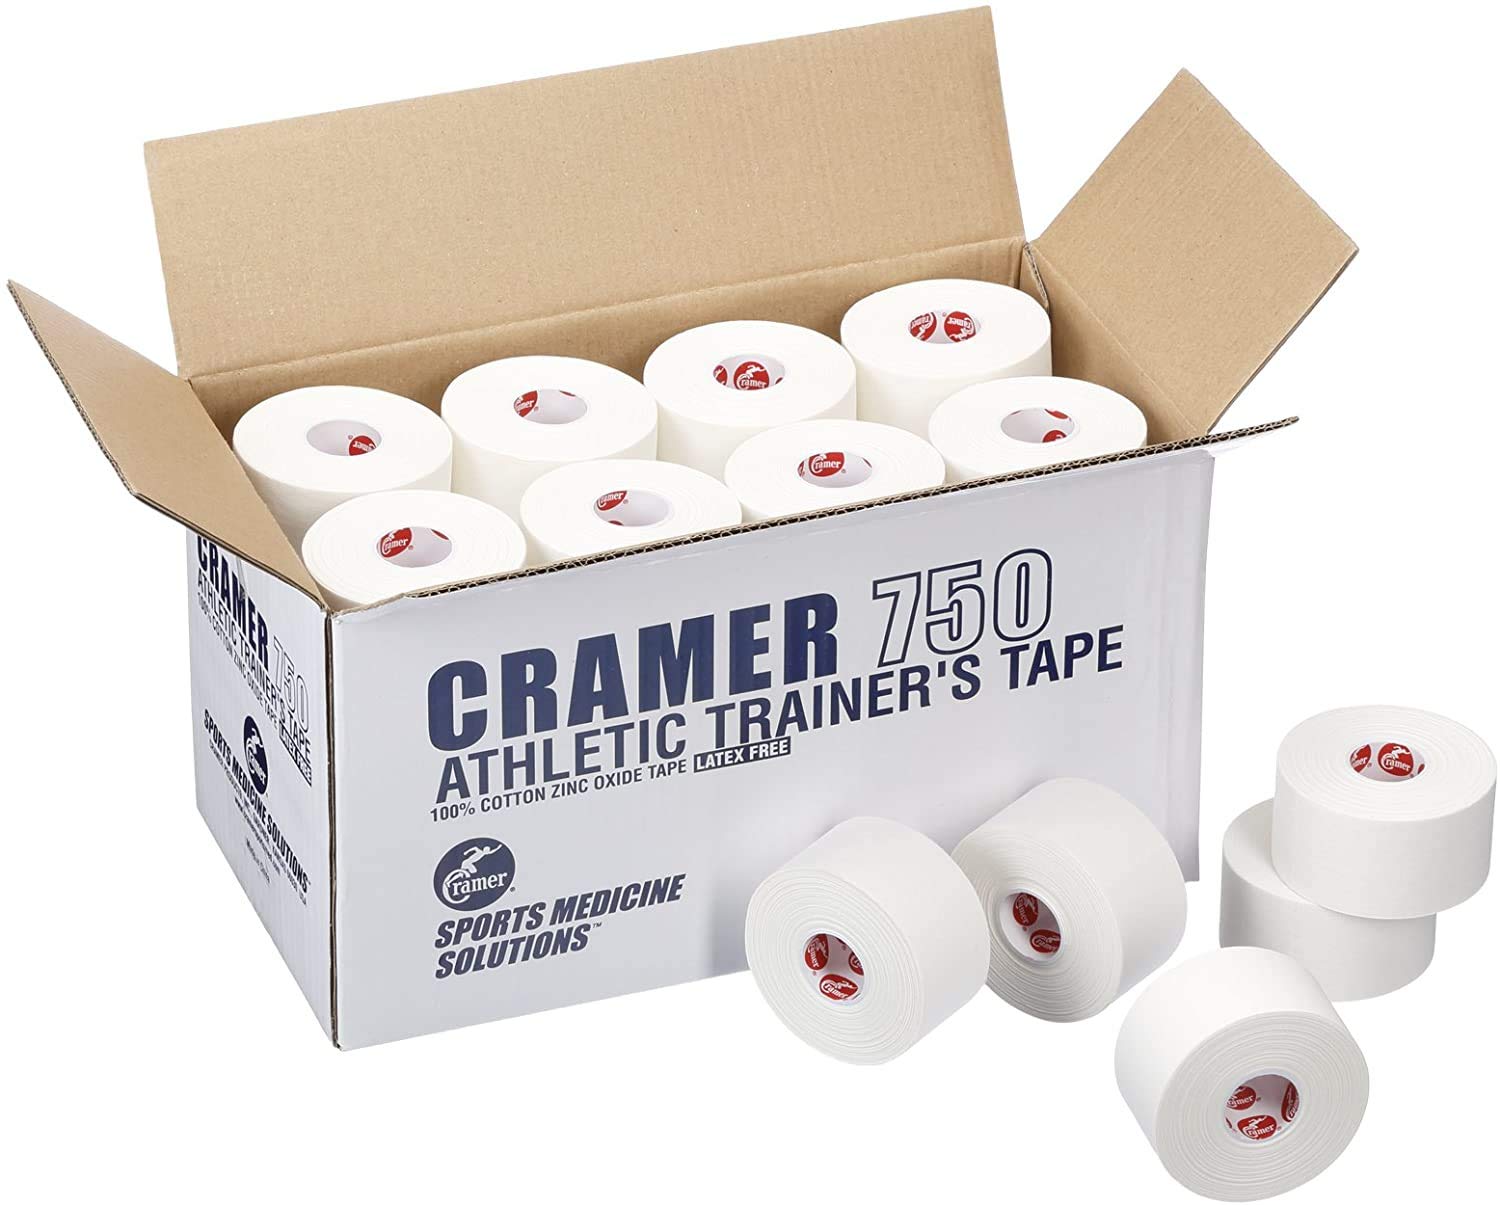 Cramer Team Color Athletic Tape for Ankle, Wrist, and Injury Taping, Helps Protect and Prevent Injuries, Promotes Faster Healing, Athletic Training First Aid Supplies, 1.5 Inch, Bulk 32 Roll Case